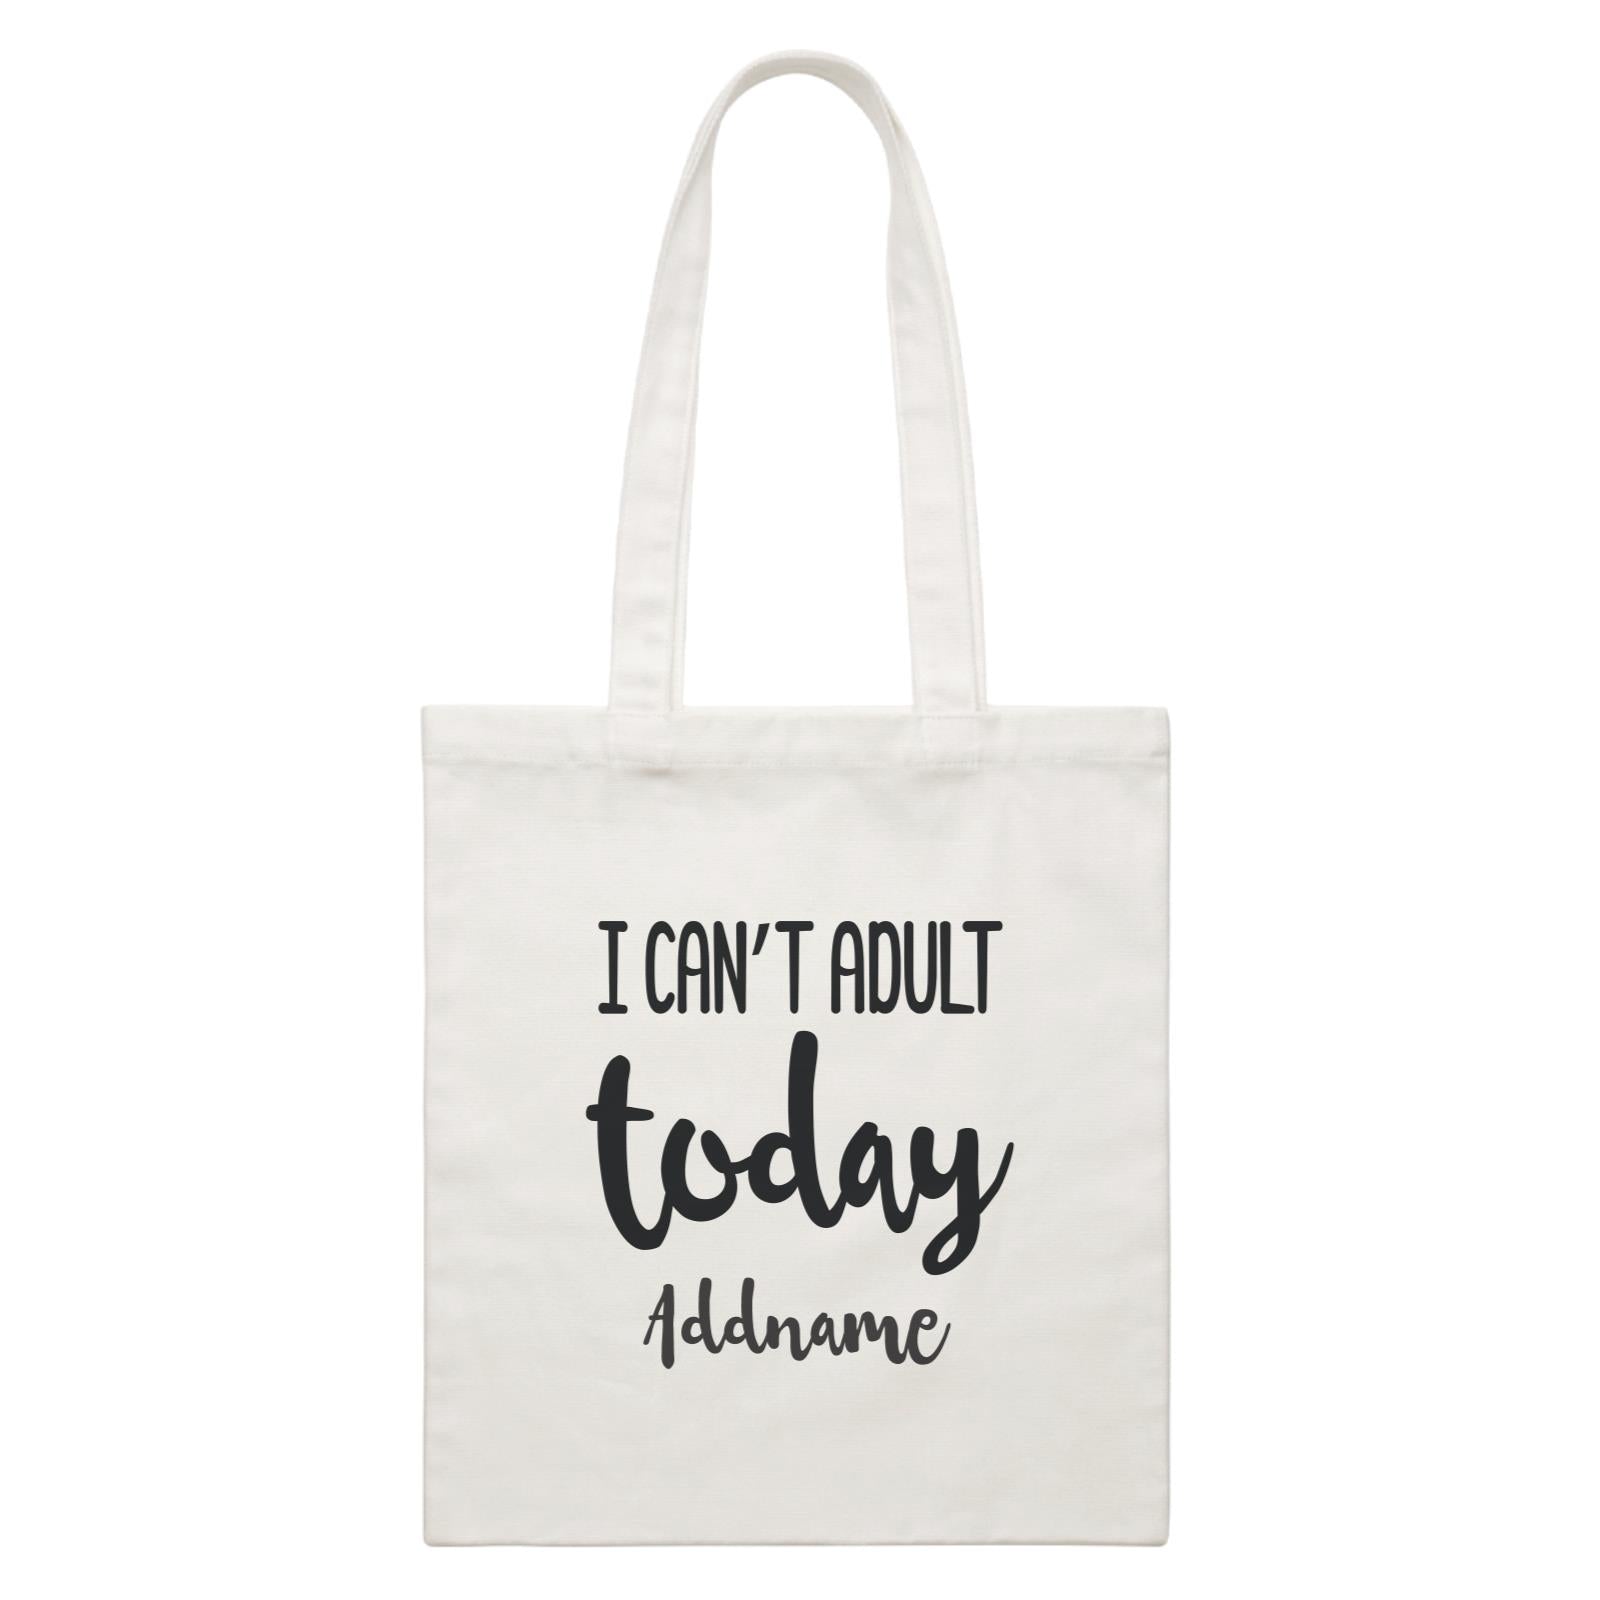 Random Quotes I can't Adult Today Addname White Canvas Bag